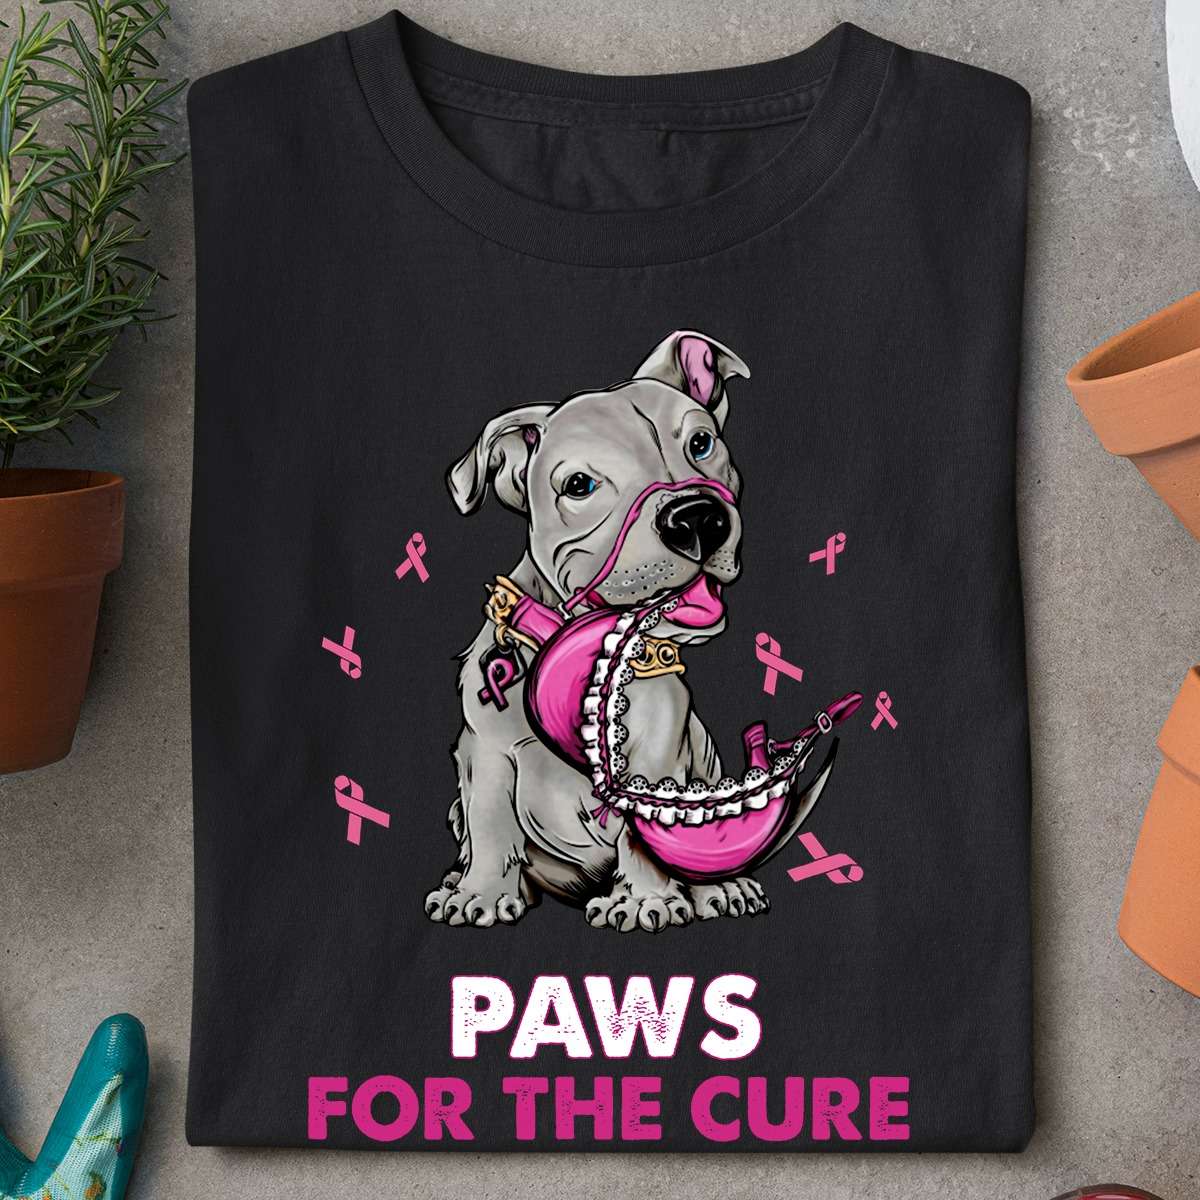 Paws for the cure - Breast cancer awareness, pitbull cancer ribbon